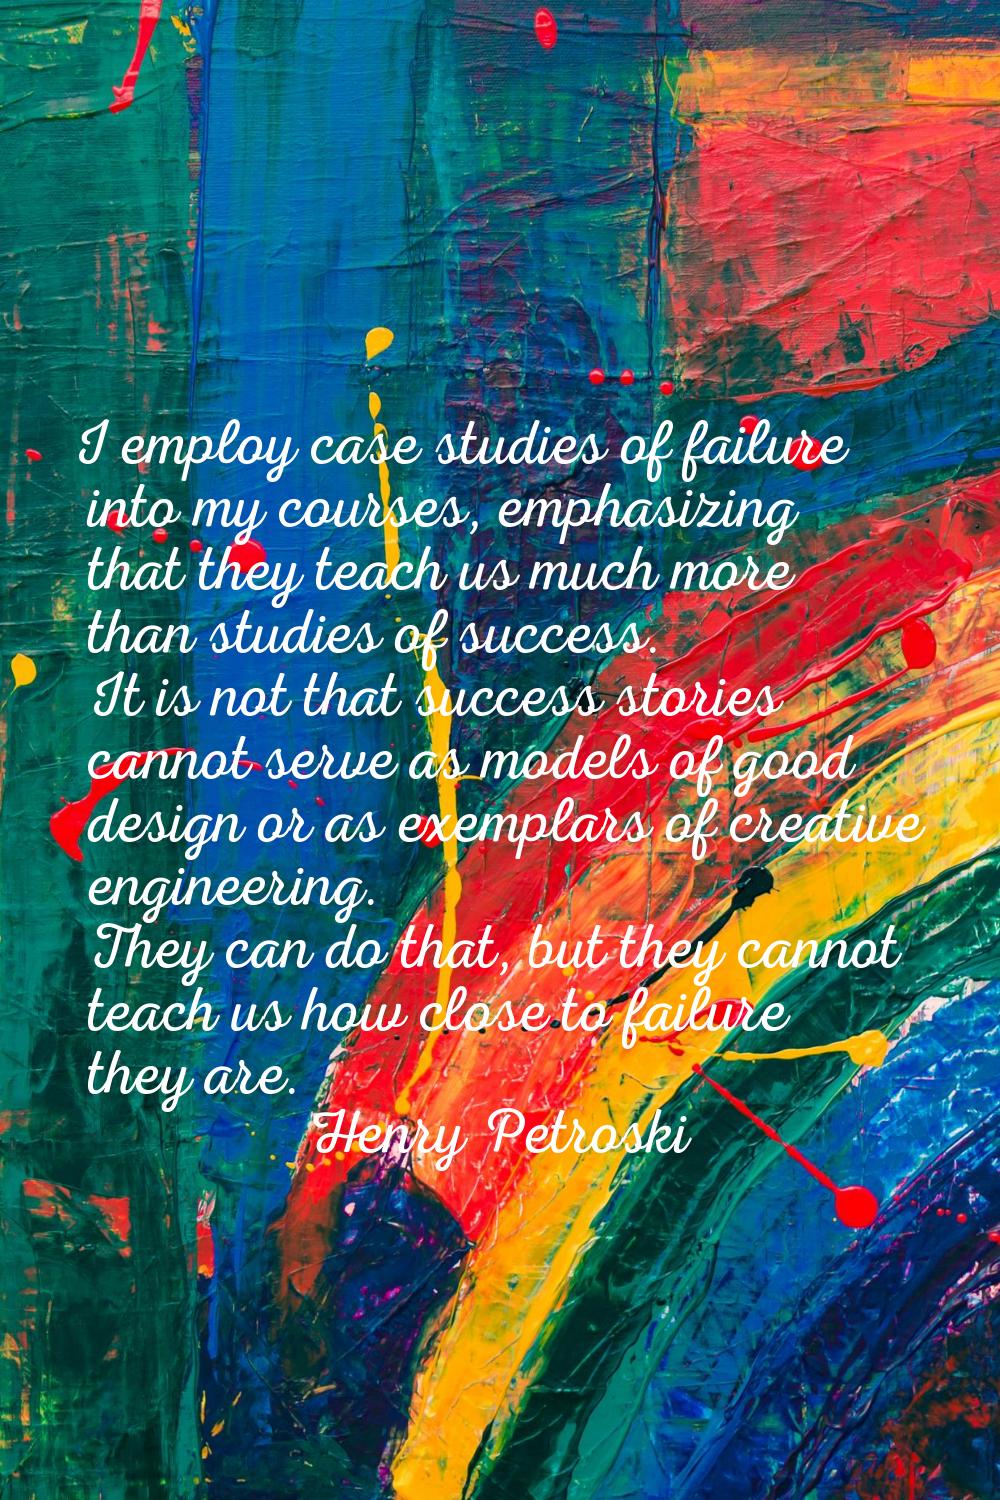 I employ case studies of failure into my courses, emphasizing that they teach us much more than stu